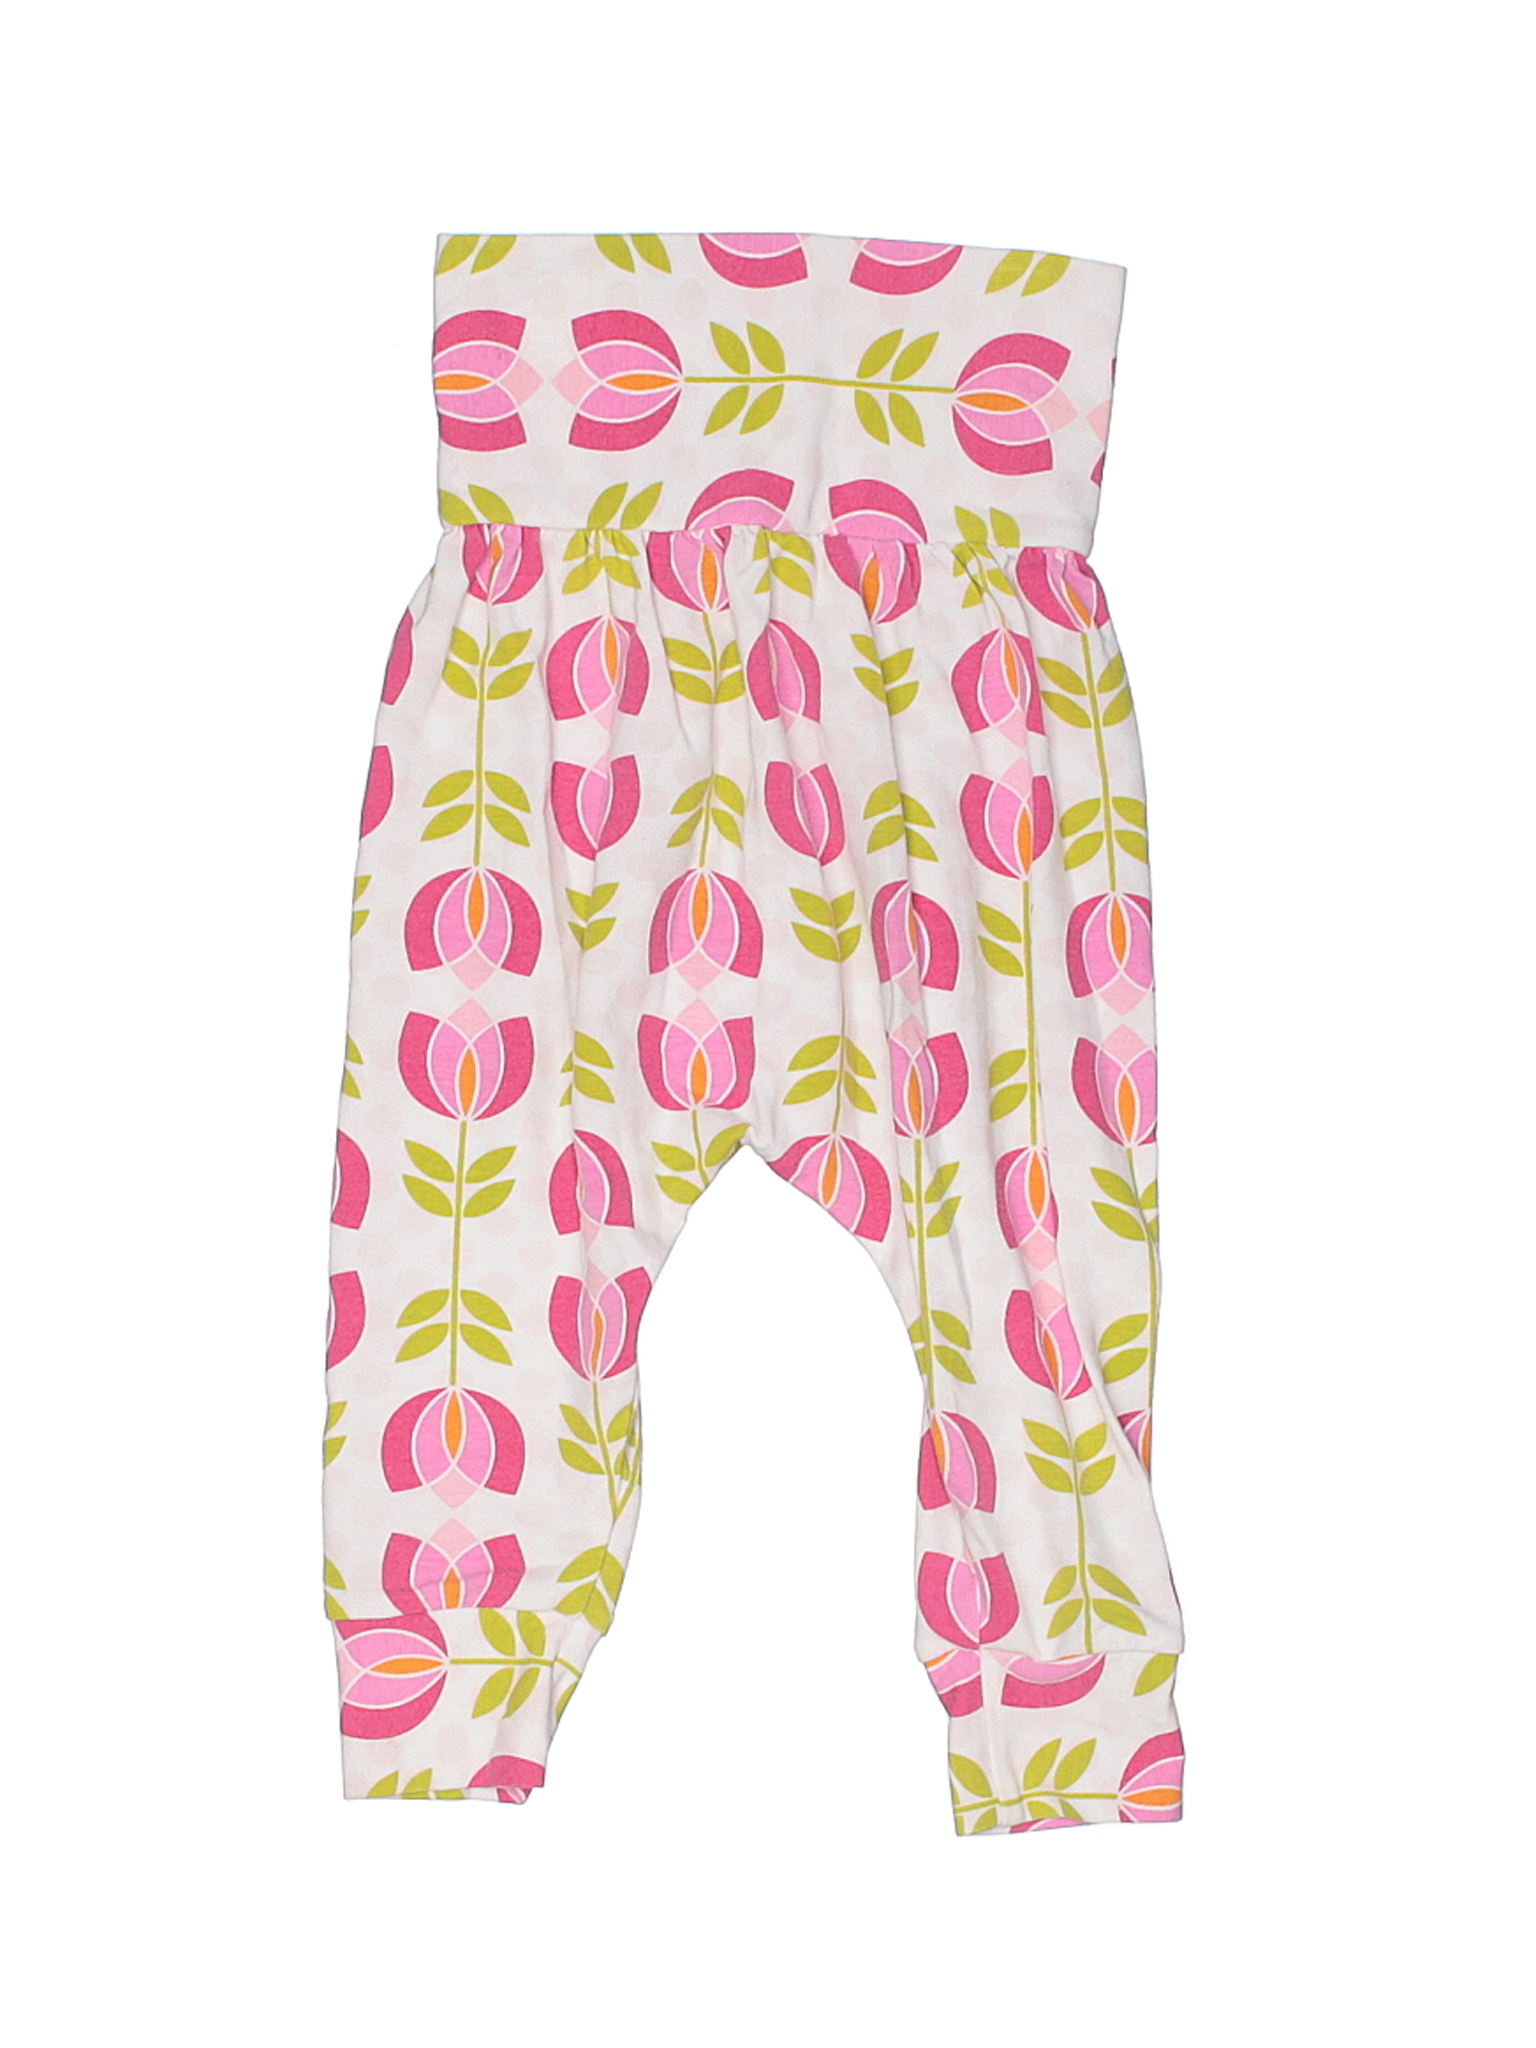  Silky Toes Baby Leggings, Toddler Seamless Soft